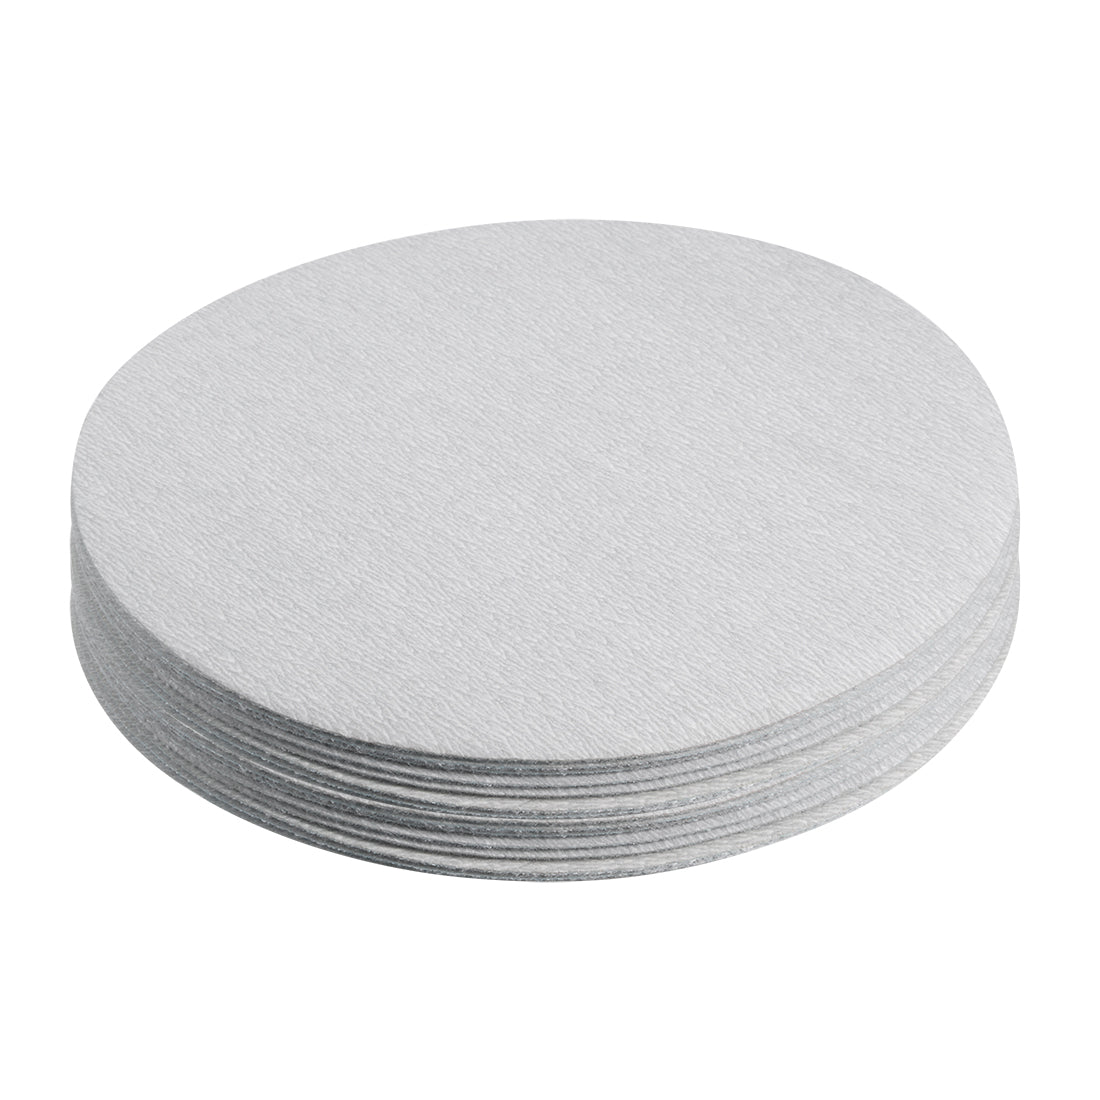 Uxcell Uxcell 20 Pcs 6-Inch Aluminum Oxide White Dry Hook and Loop Sanding Discs Flocking Sandpaper 120 Grit